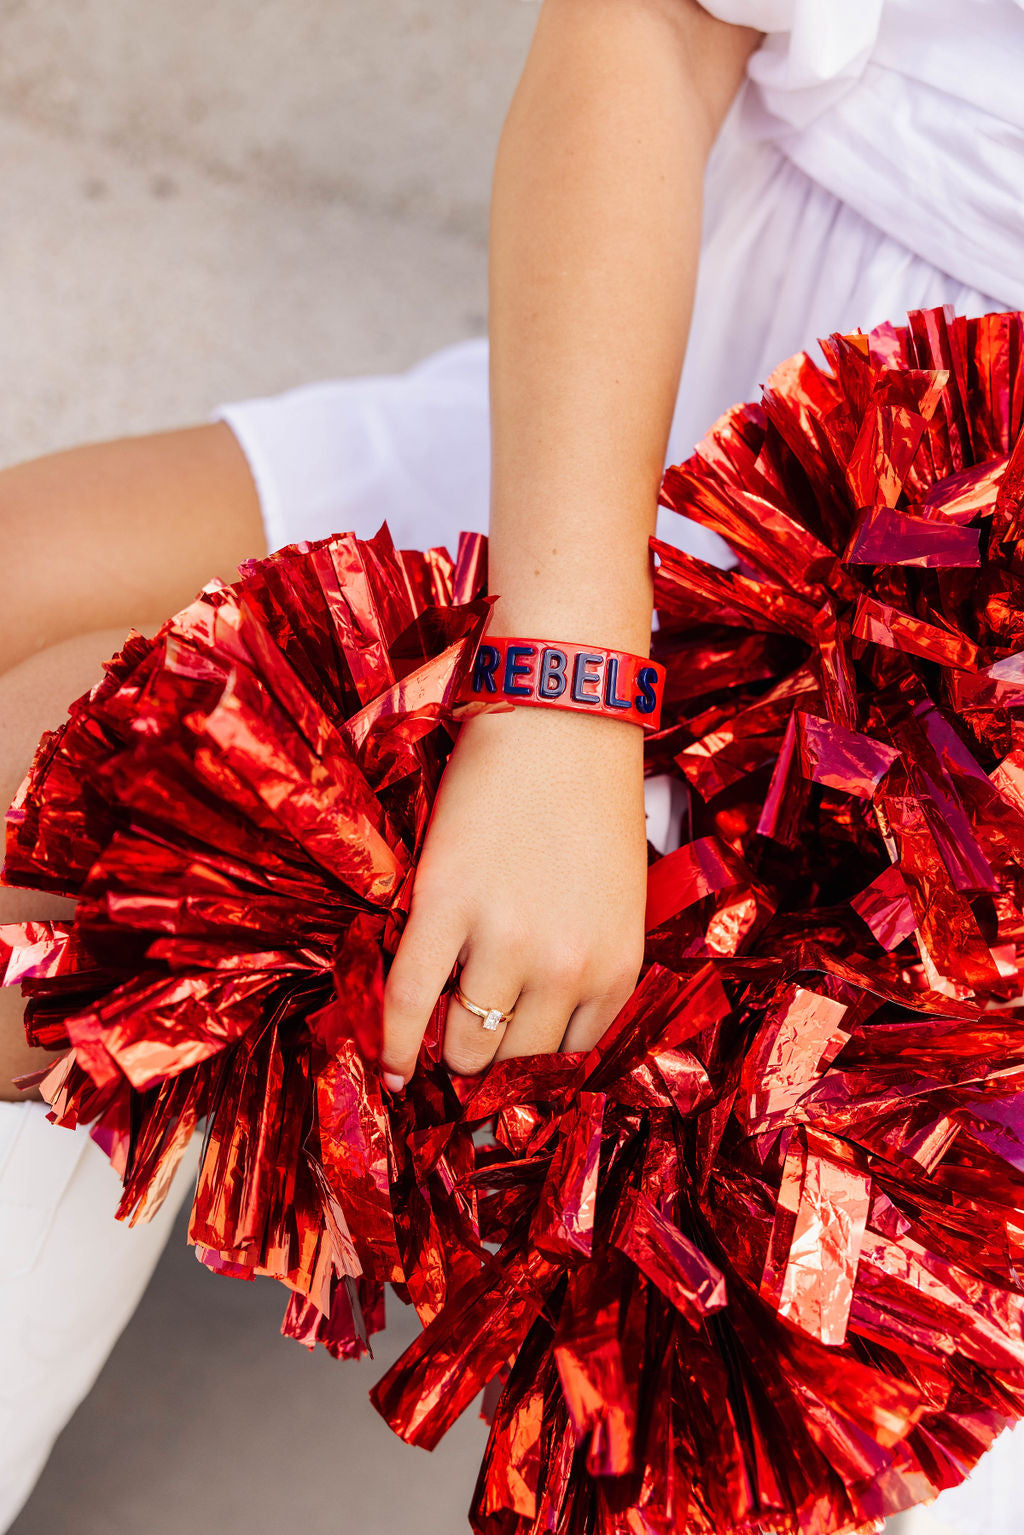 University of Mississippi Red REBELS Cuff